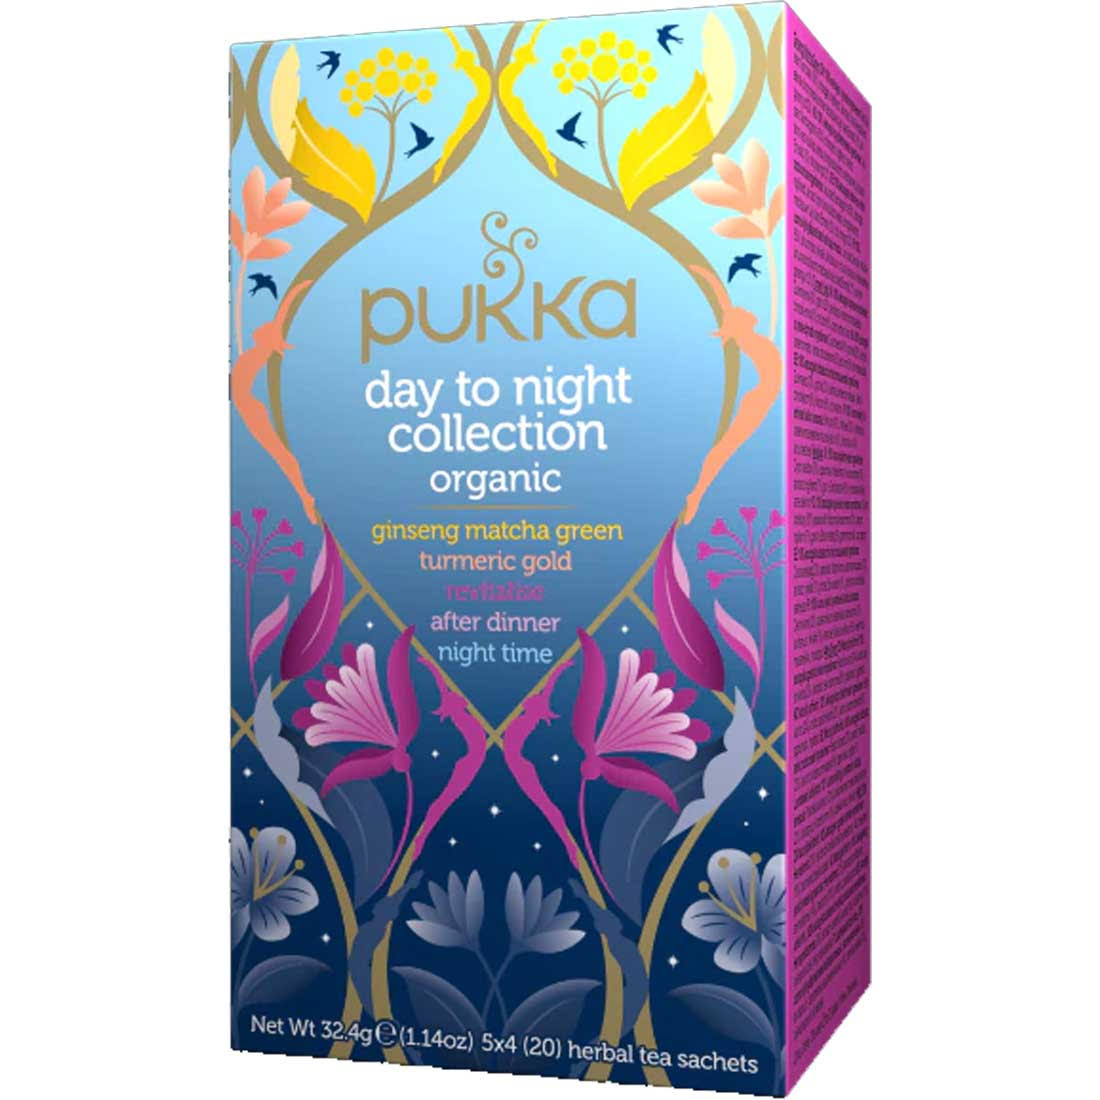 Pukka Day to Night Collection Herbal Tea 20 Bags